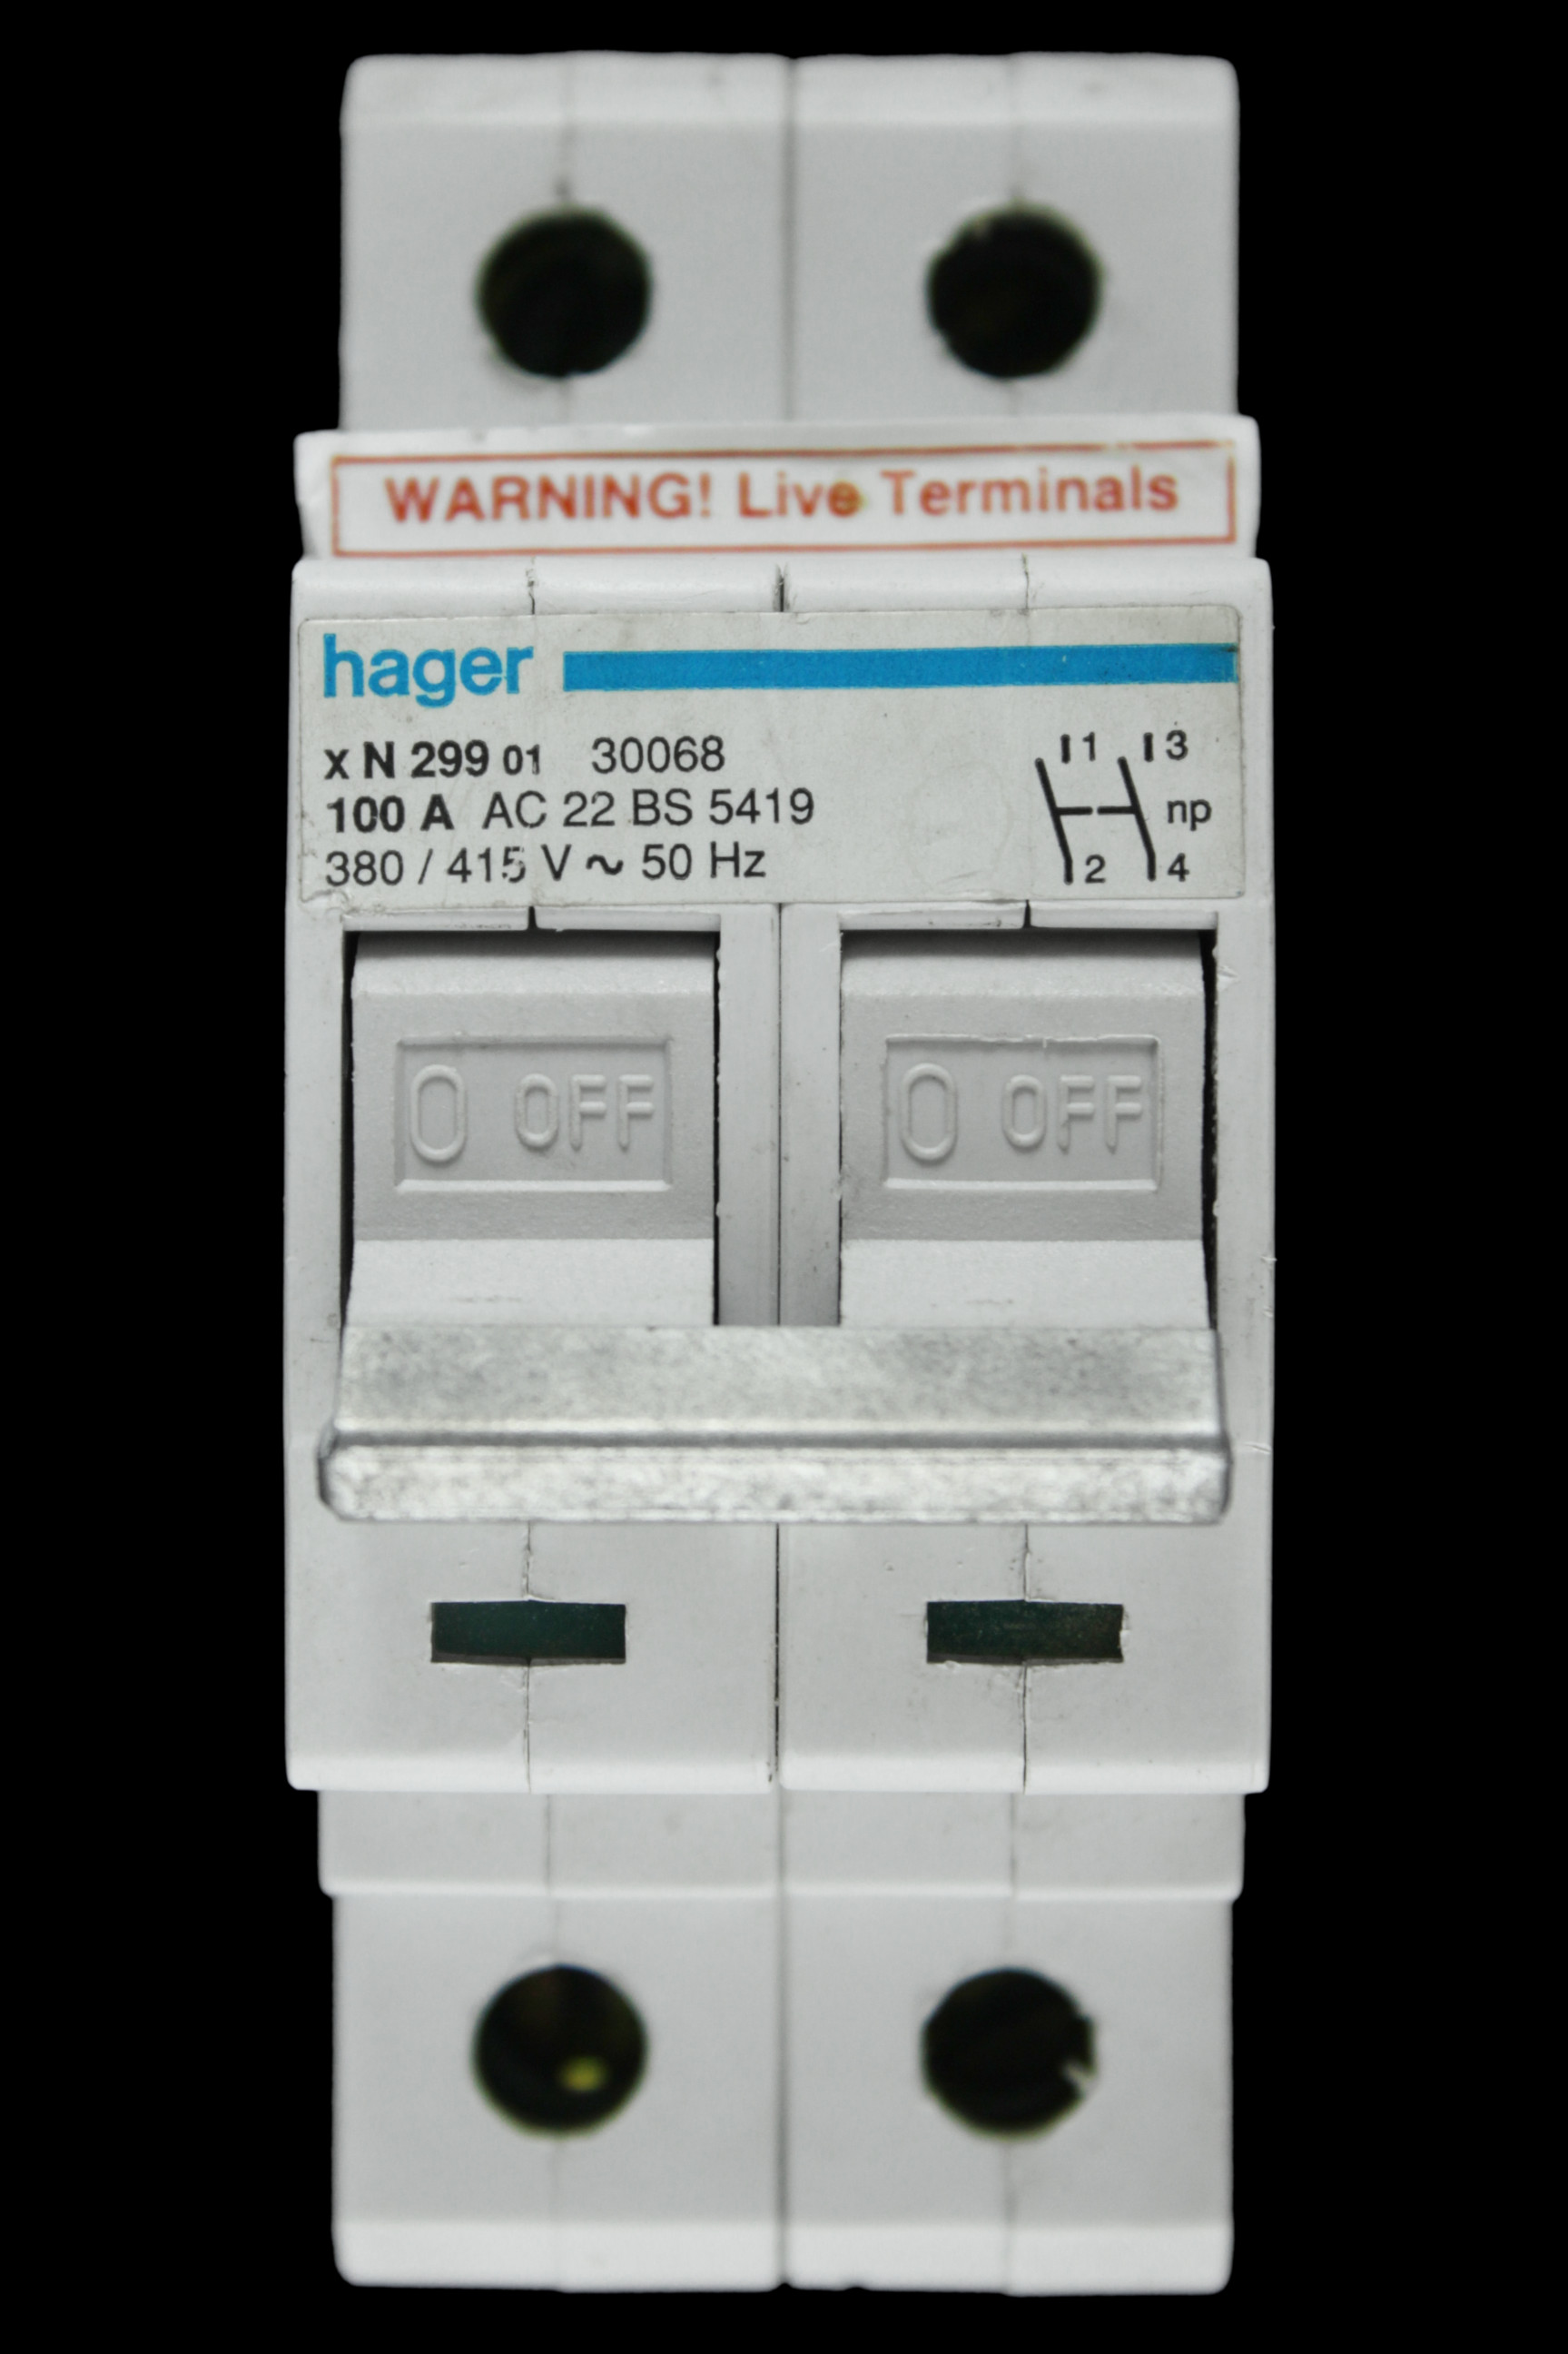 HAGER 100 AMP DOUBLE POLE MAIN SWITCH DISCONNECTOR X N299 01 30068